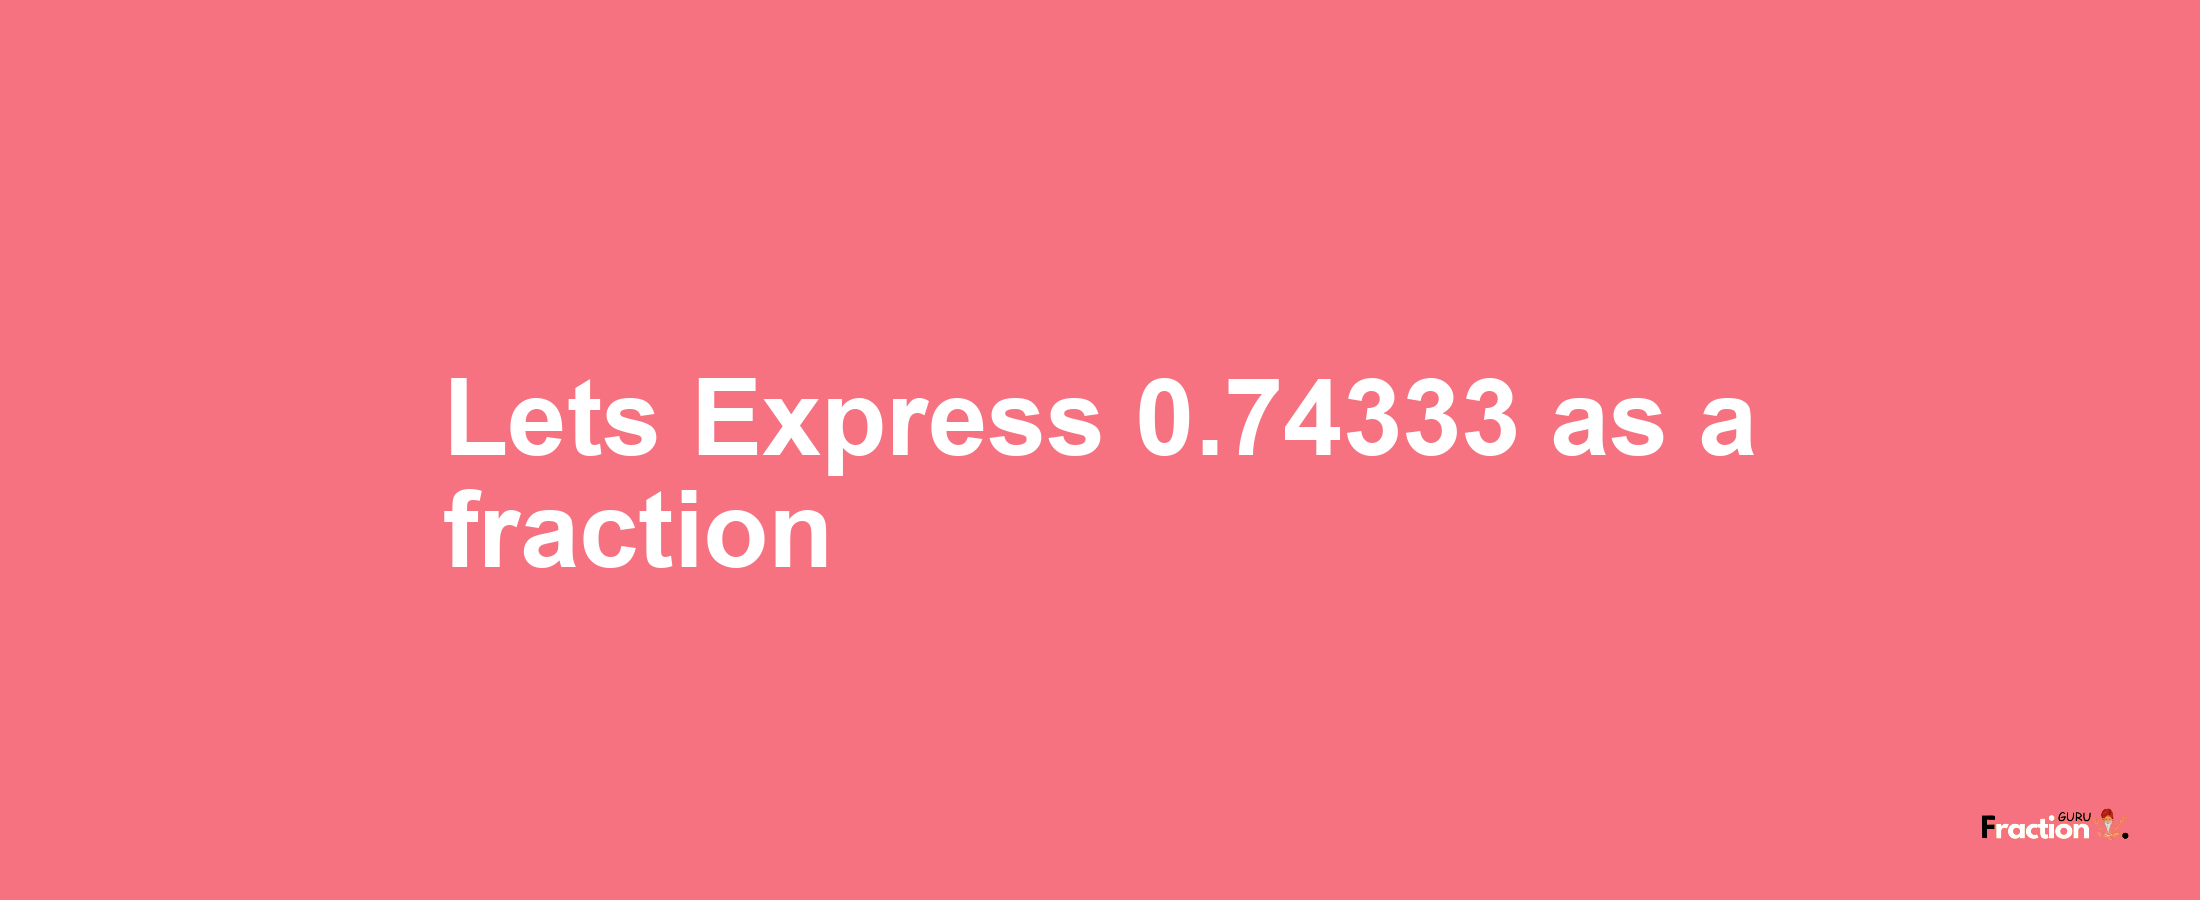 Lets Express 0.74333 as afraction